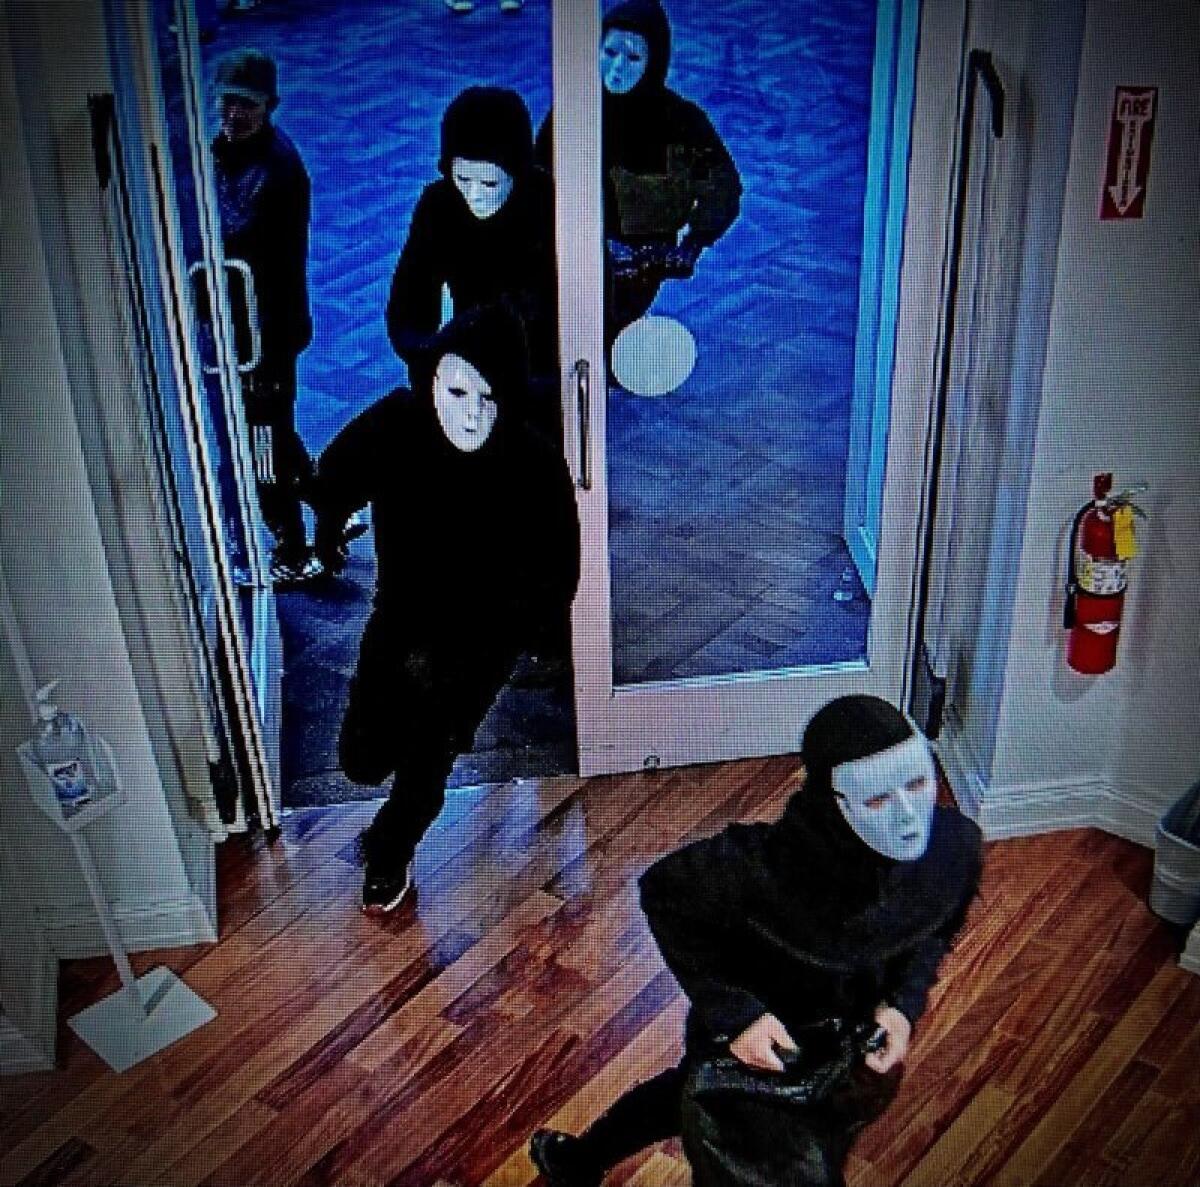 Four people in white masks enter a store.